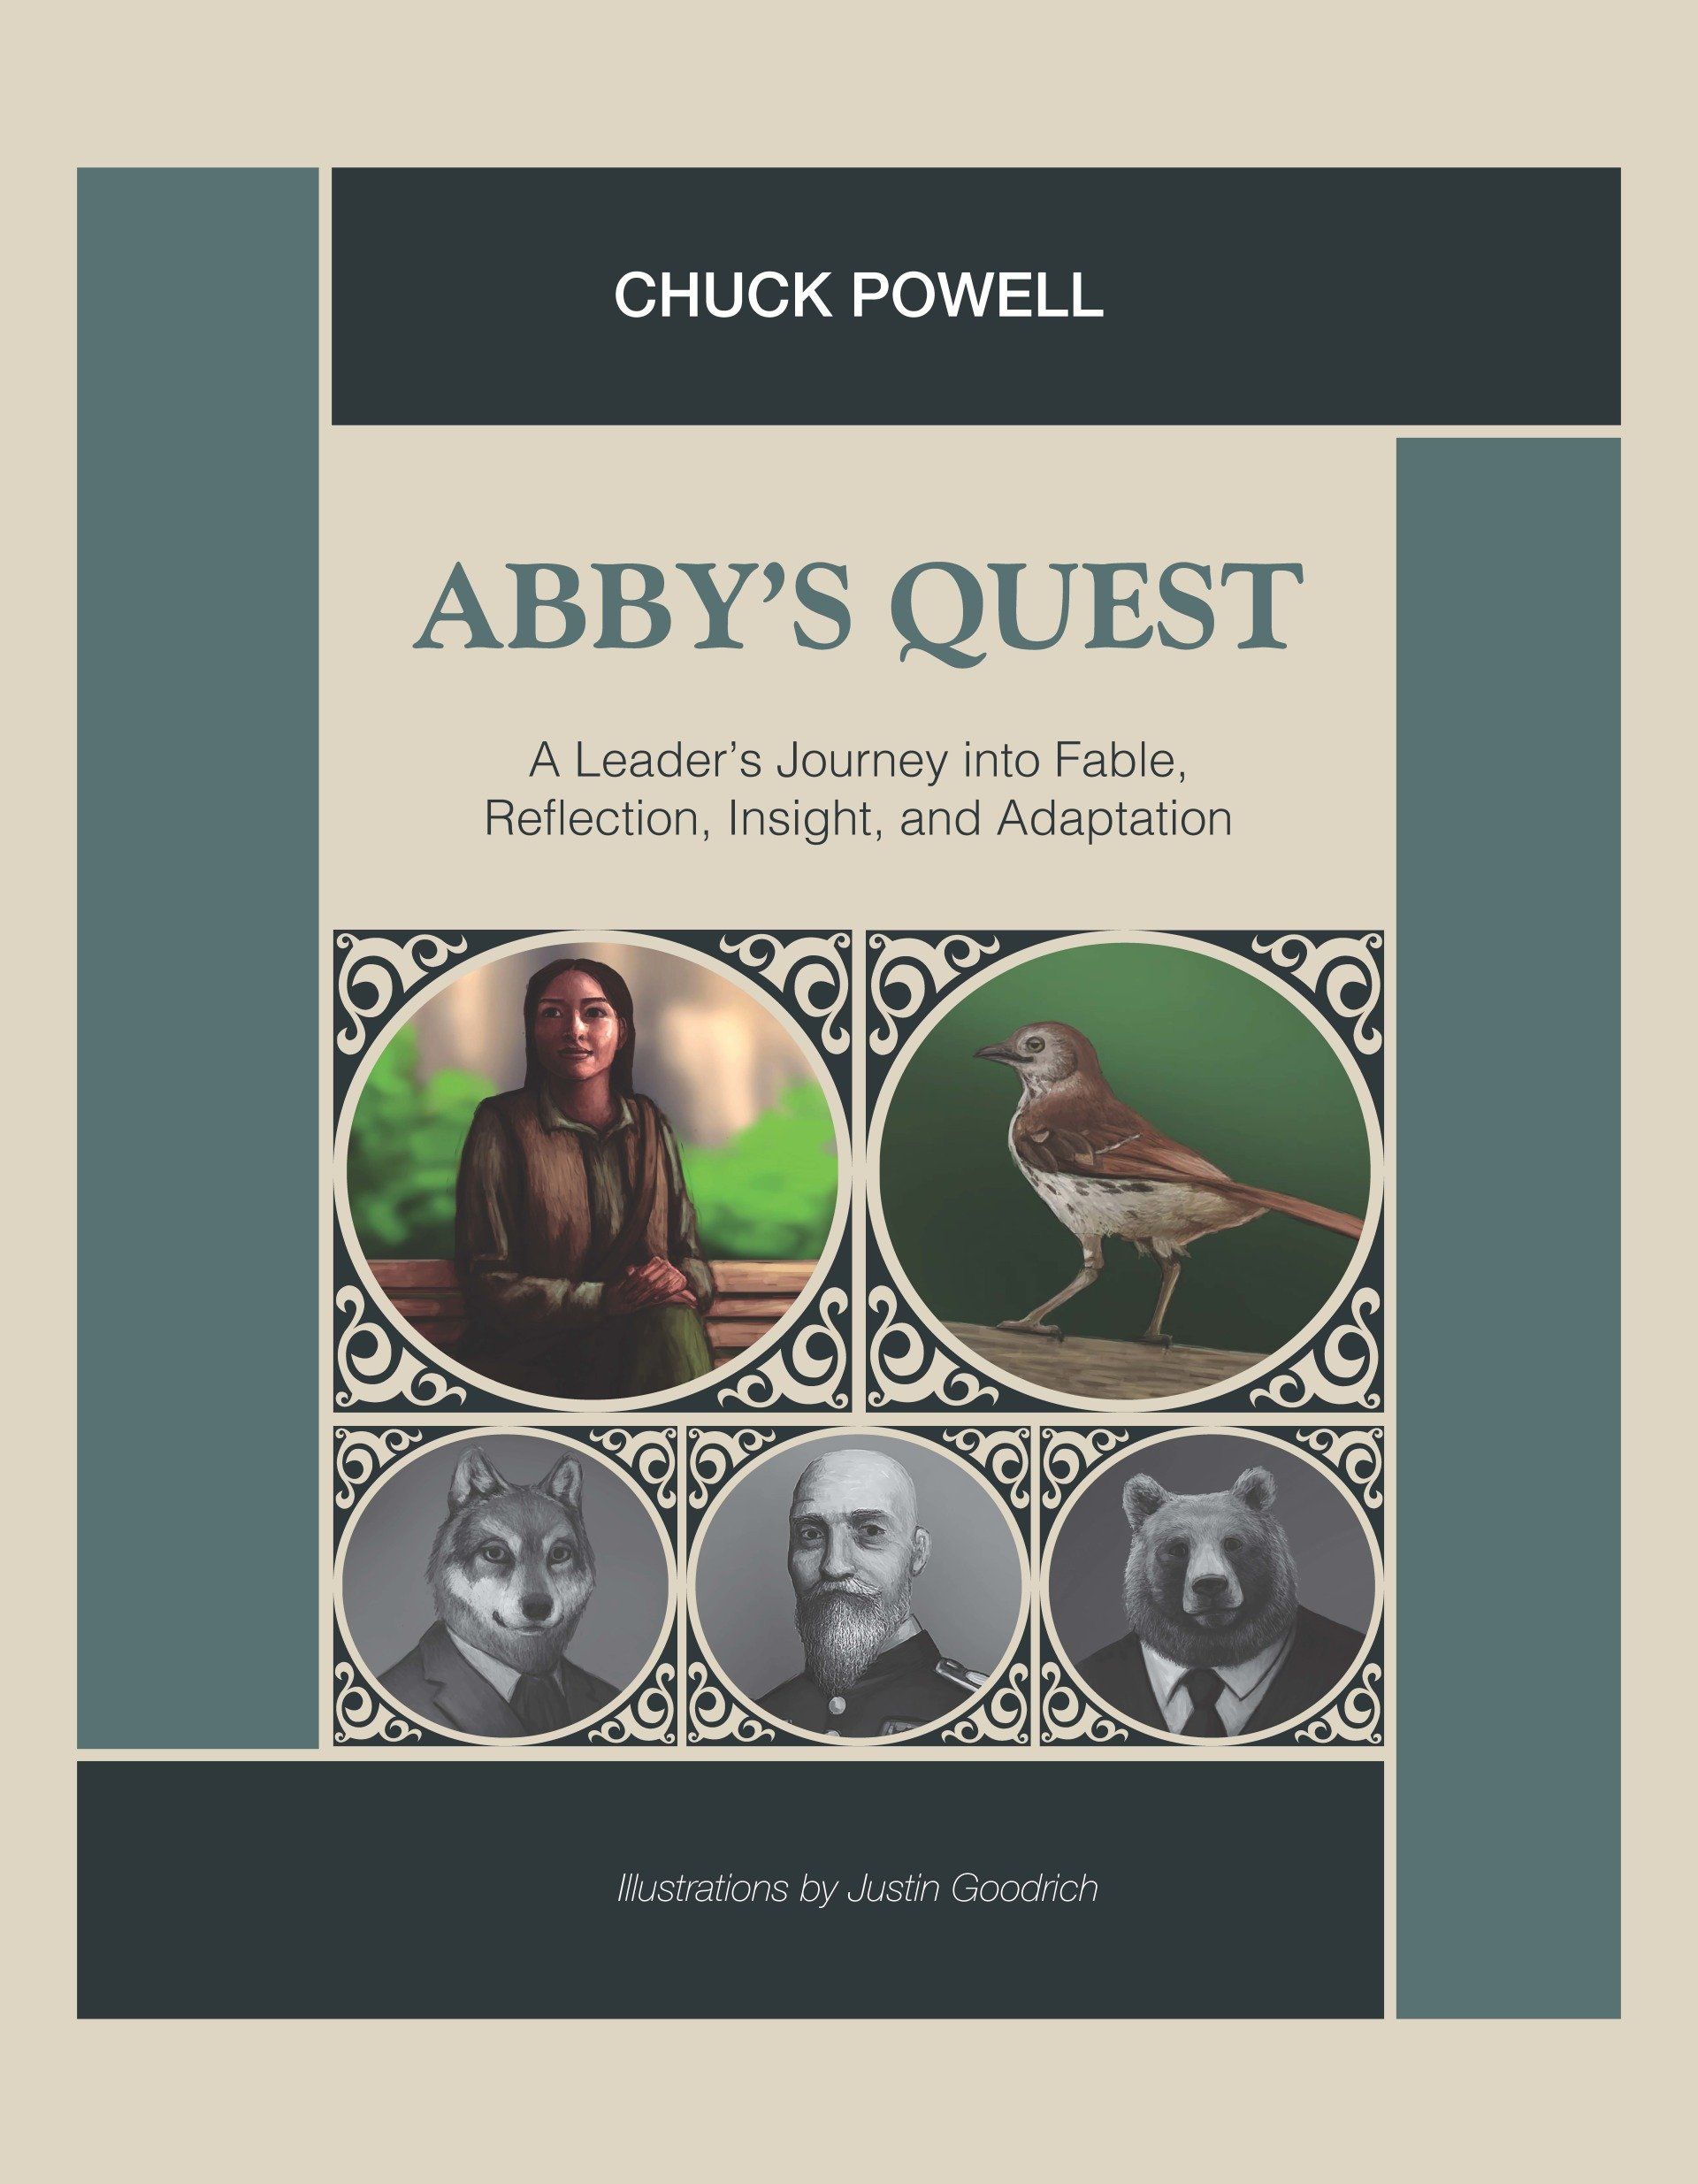 ABBY’S QUEST-A Leader’s Journey into Fable, Reflection, Insight, and Adaptation